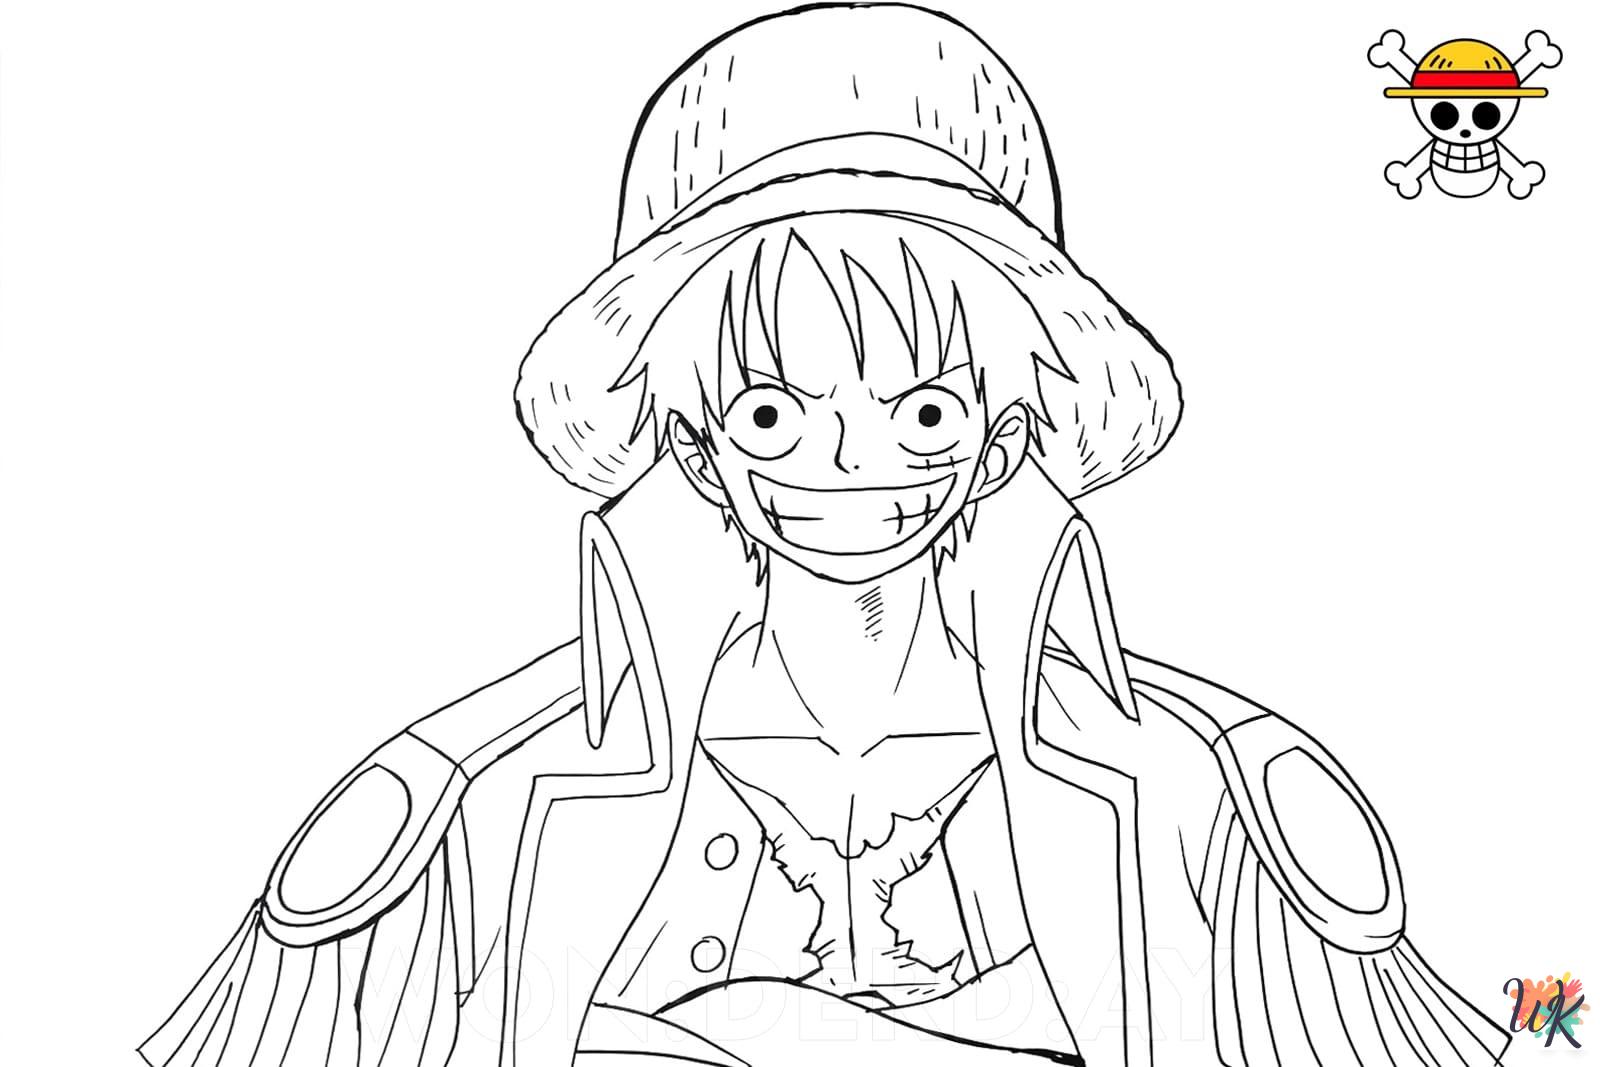 One Piece coloring book pages